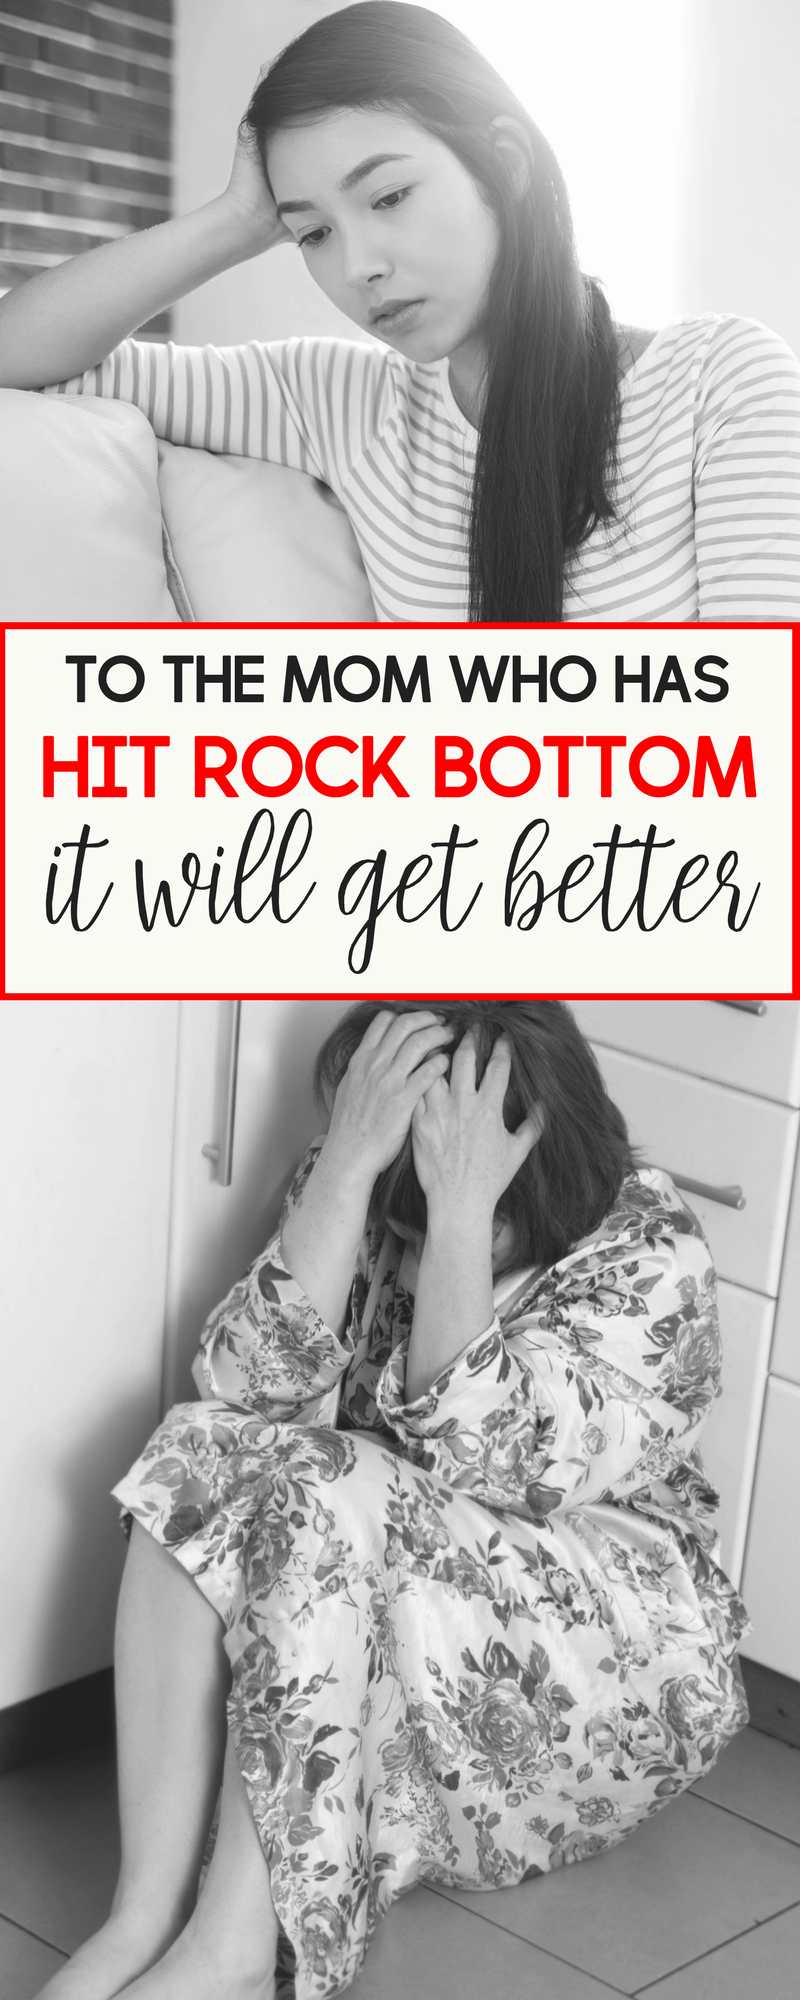 To the mom who has hit rock bottom or is on the verge of hitting rock bottom- it will get better. Maybe not right away, but it will get better.